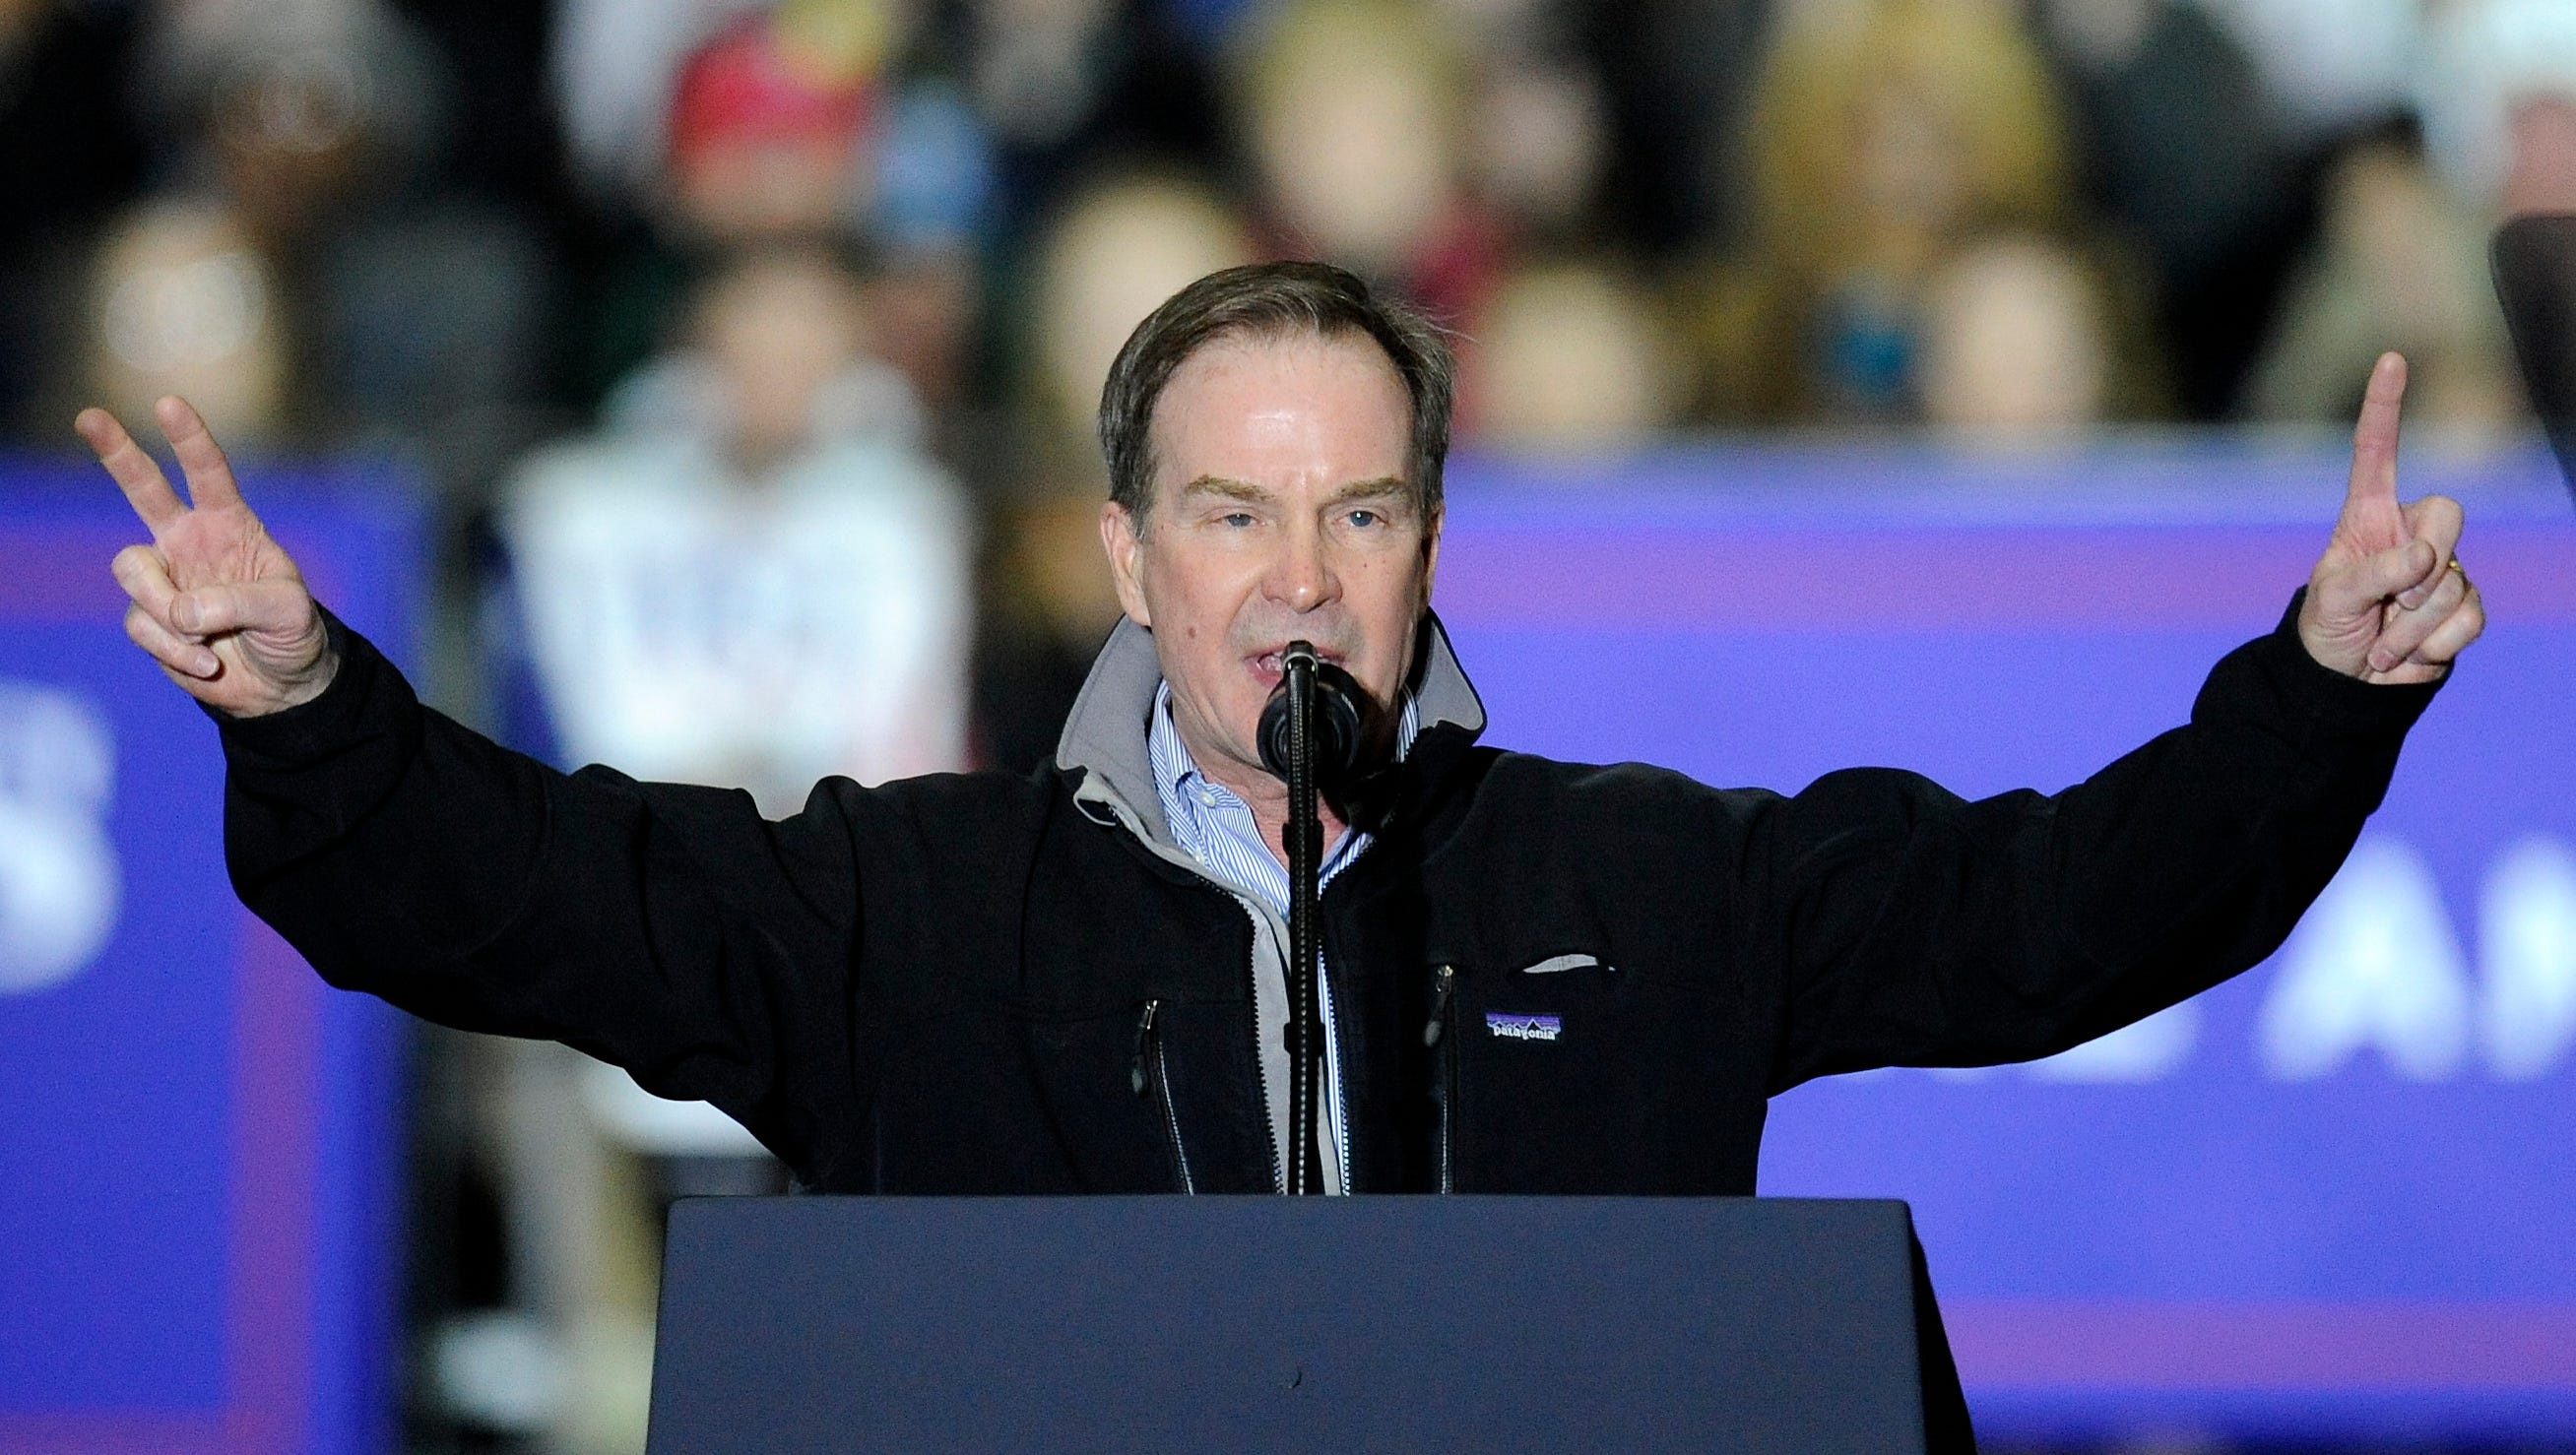 Michigan Attorney General Bill Schuette, Republican  candidate for governor, addresses the crowd.